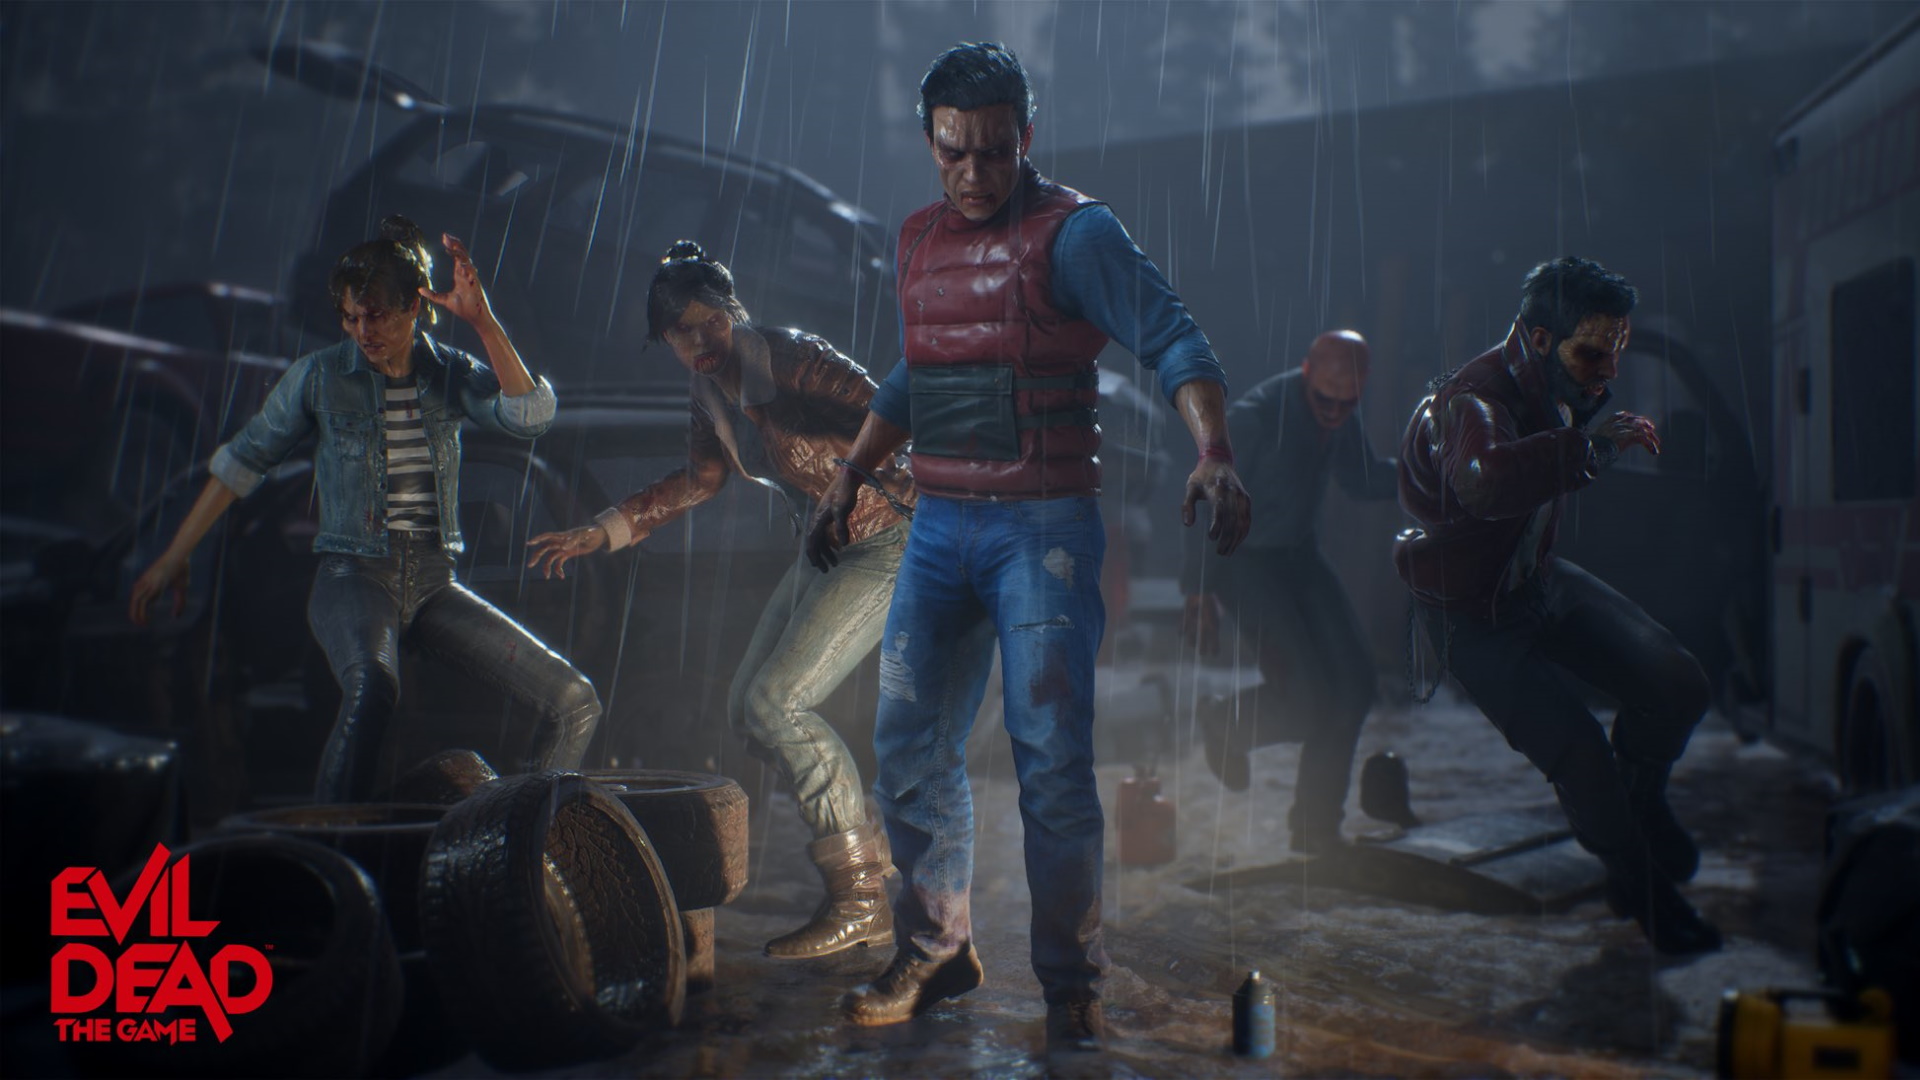 Evil Dead: The Game - A group of possessed deadites pose in the rain